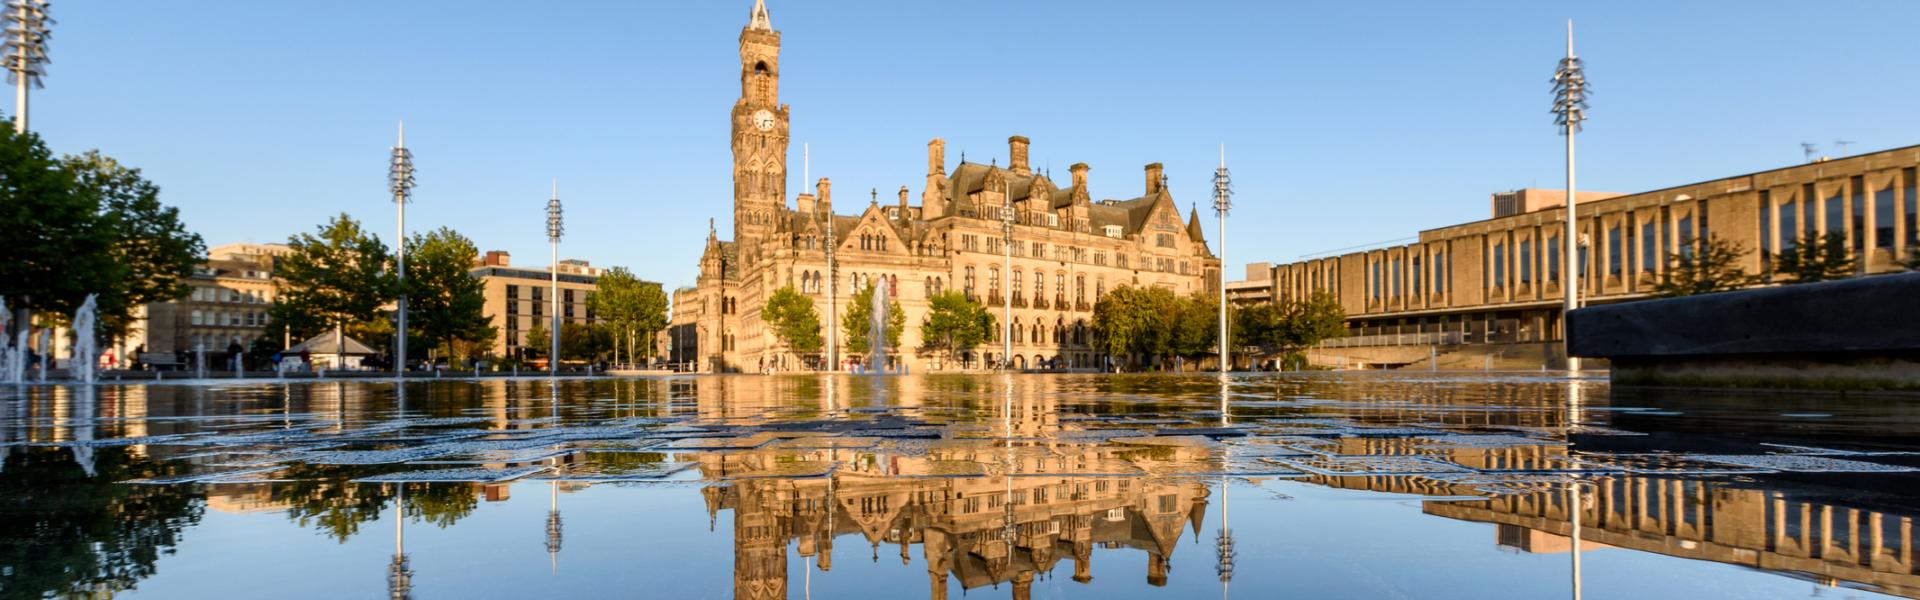 Holiday lettings & accommodation in Bradford District - HomeToGo